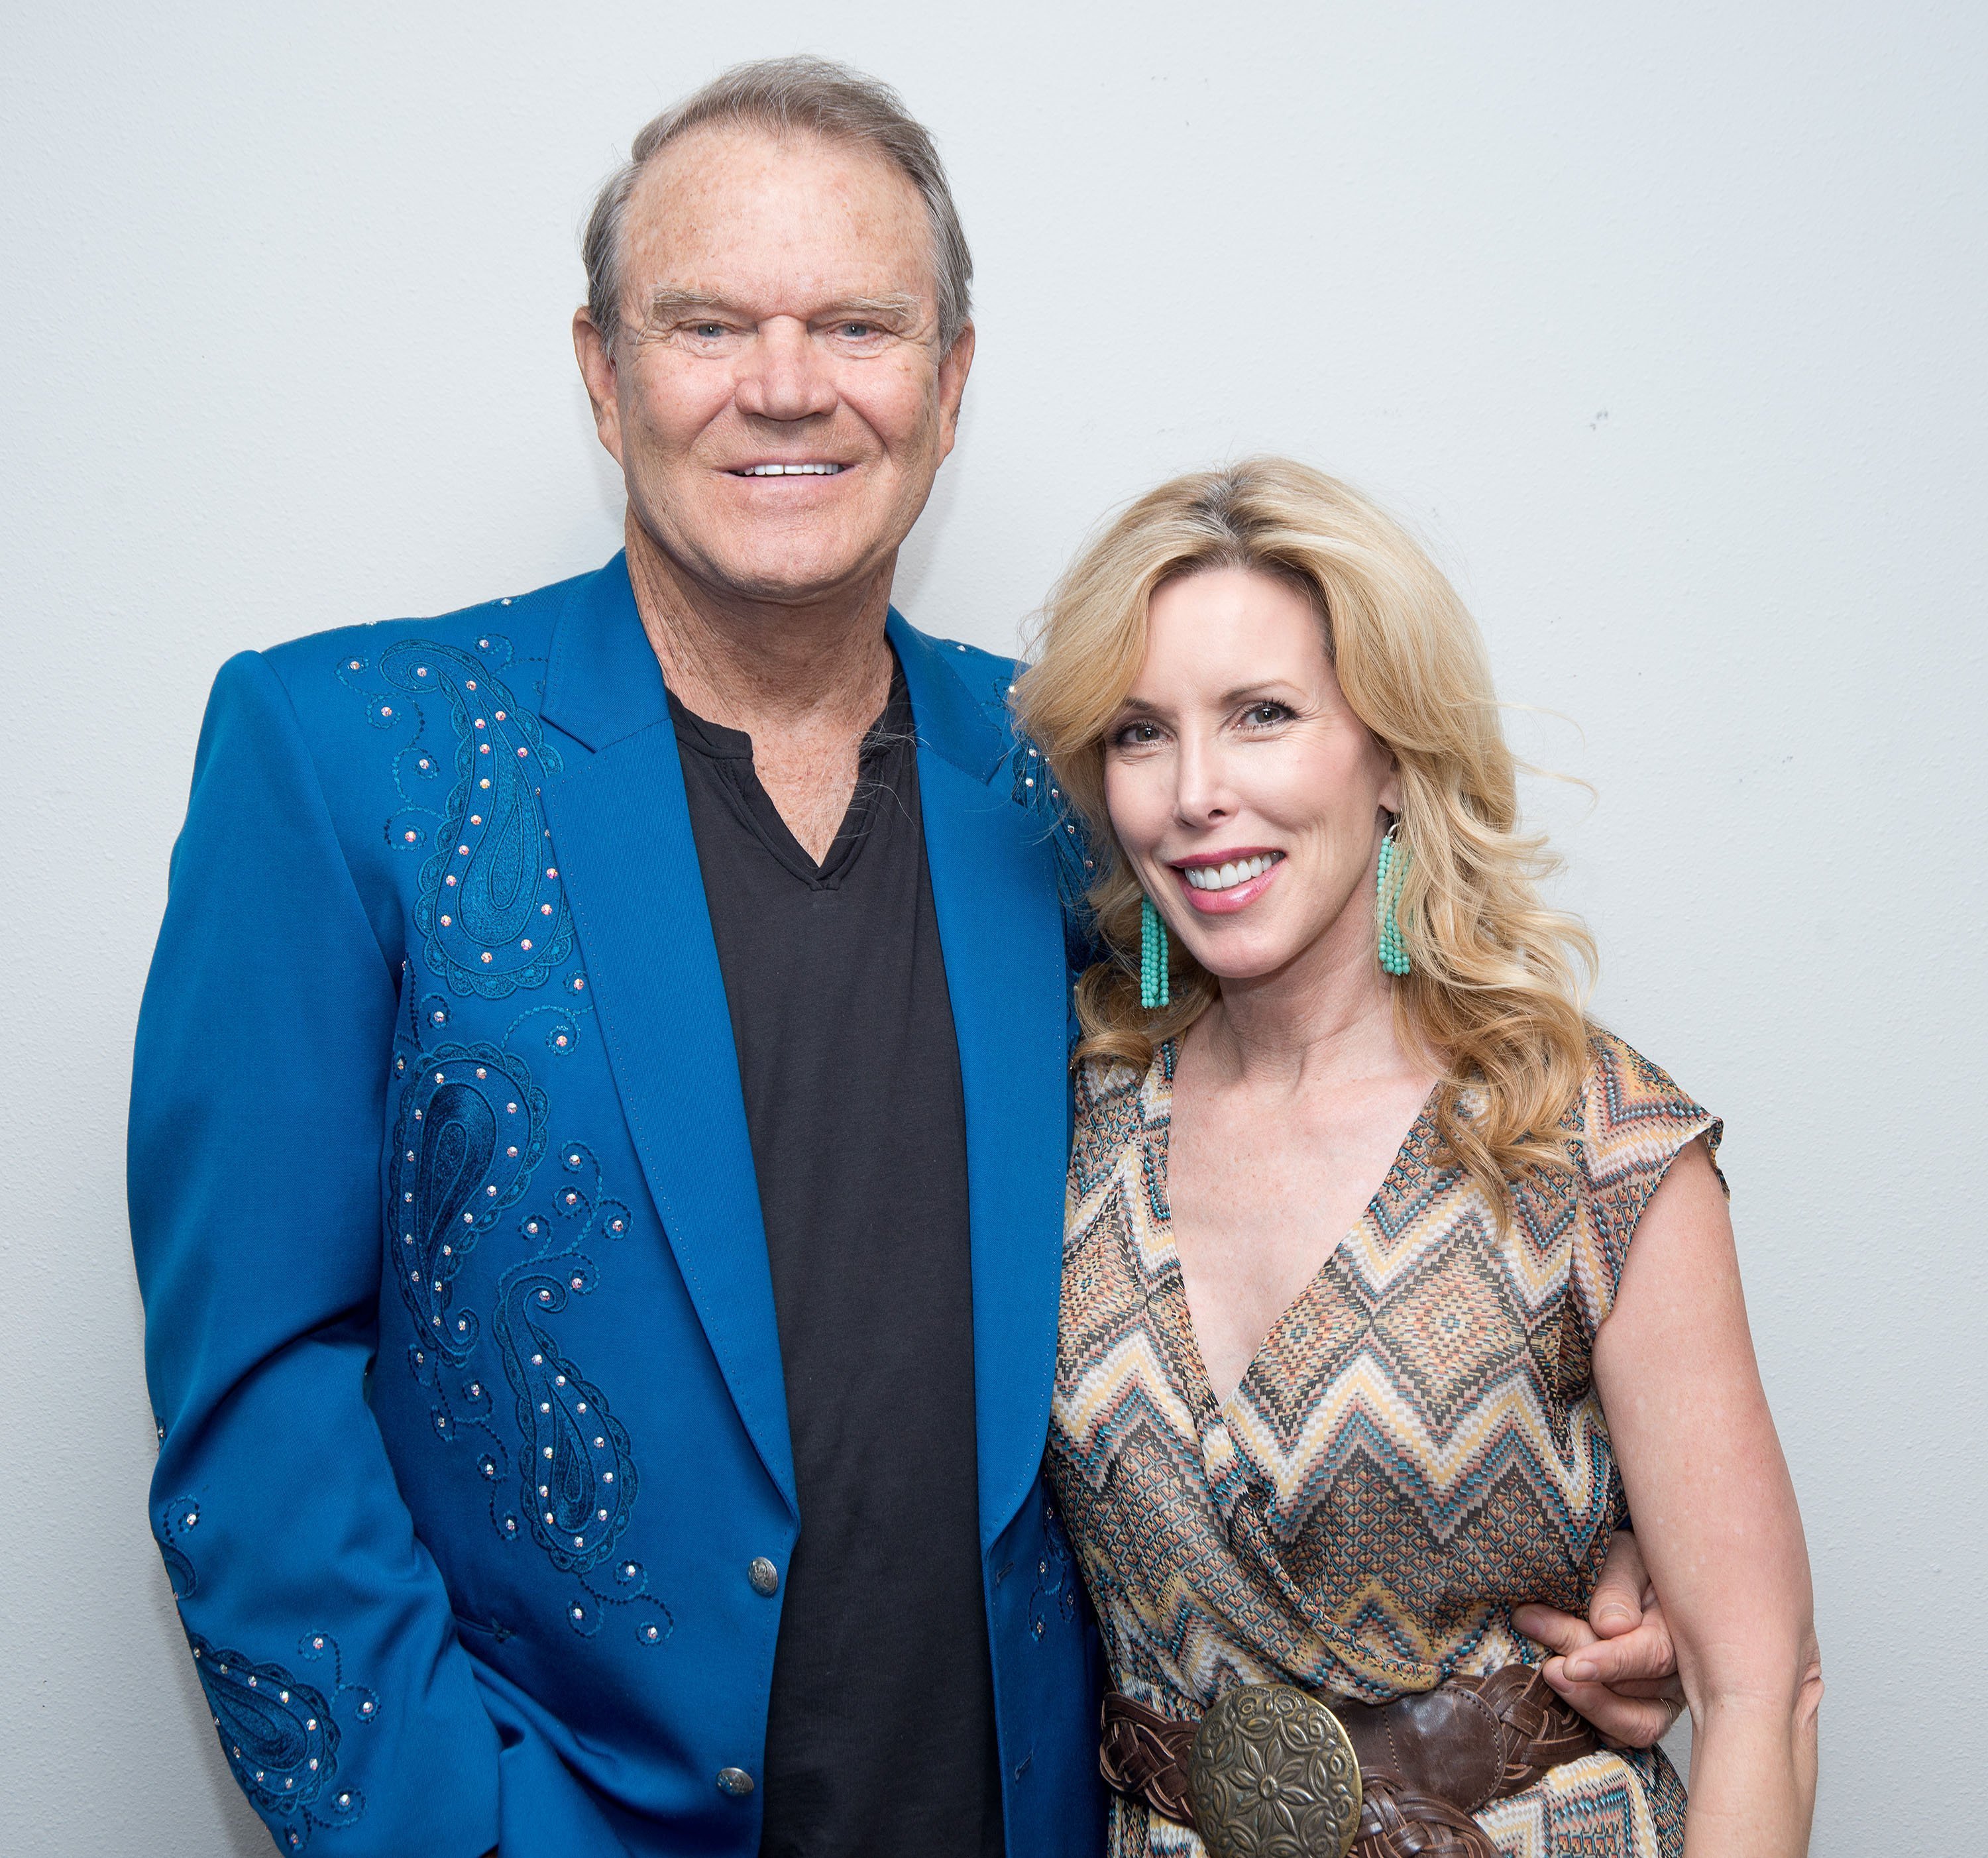 Glen Campbell and wife Kim during his Goodbye Tour performance at Route 66 Casino's Legends Theater on July 29, 2012. | Photo: Getty Images